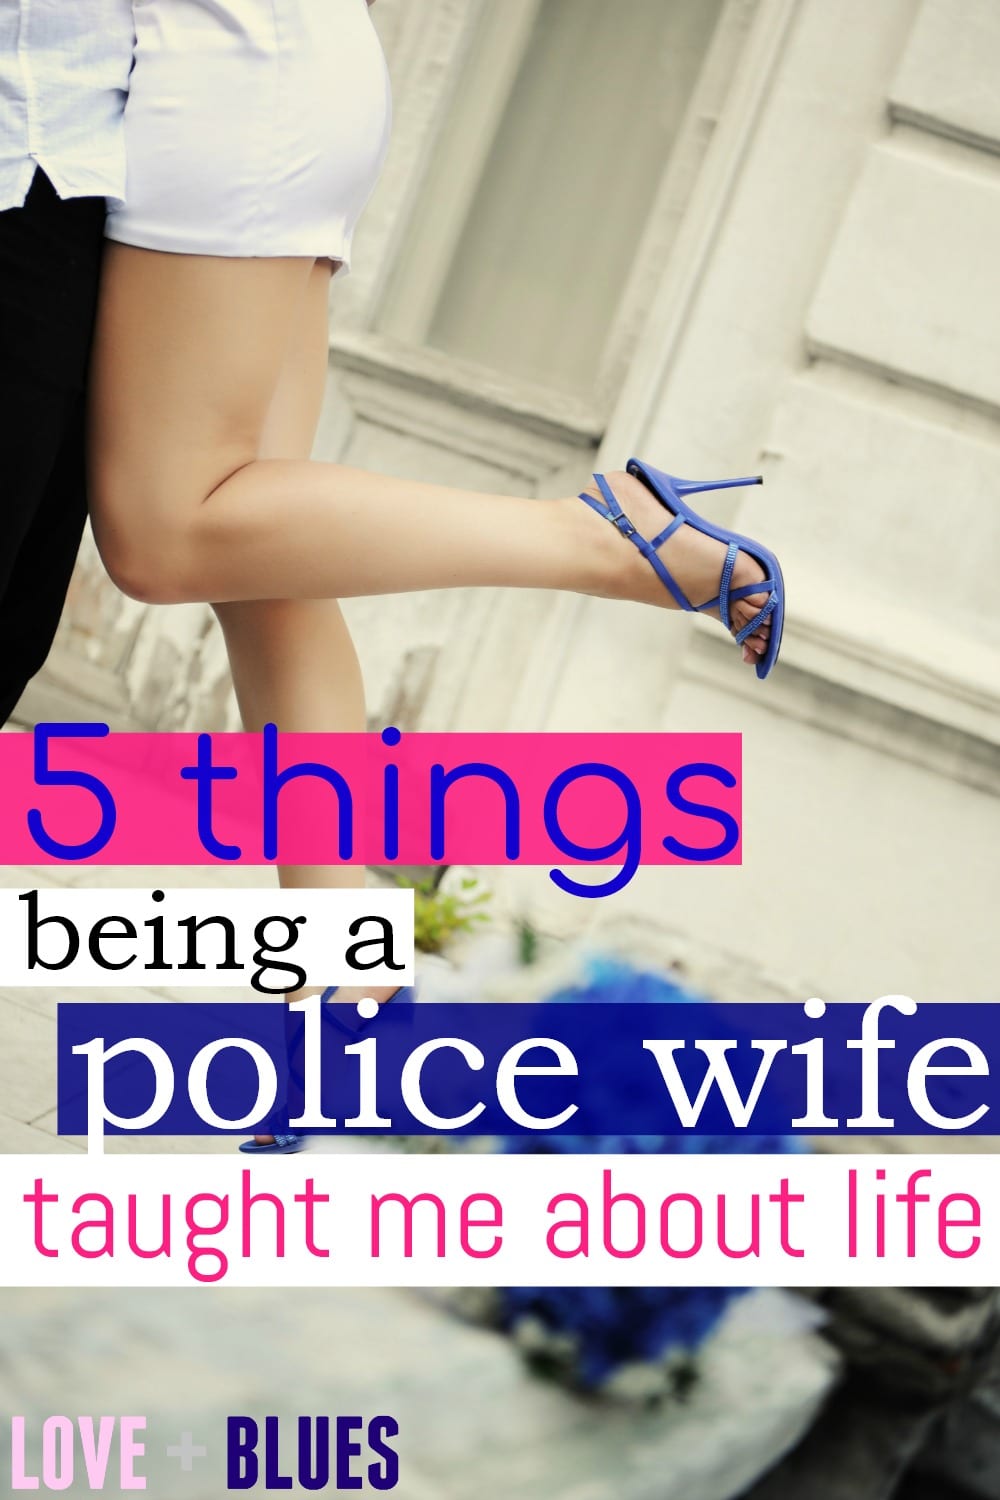 I love this, and I totally agree! I've grown SO MUCH over the years of being a police wife, and seriously wouldn't trade it for the world... thanks for pinning! #policewifelife #lawenforcement